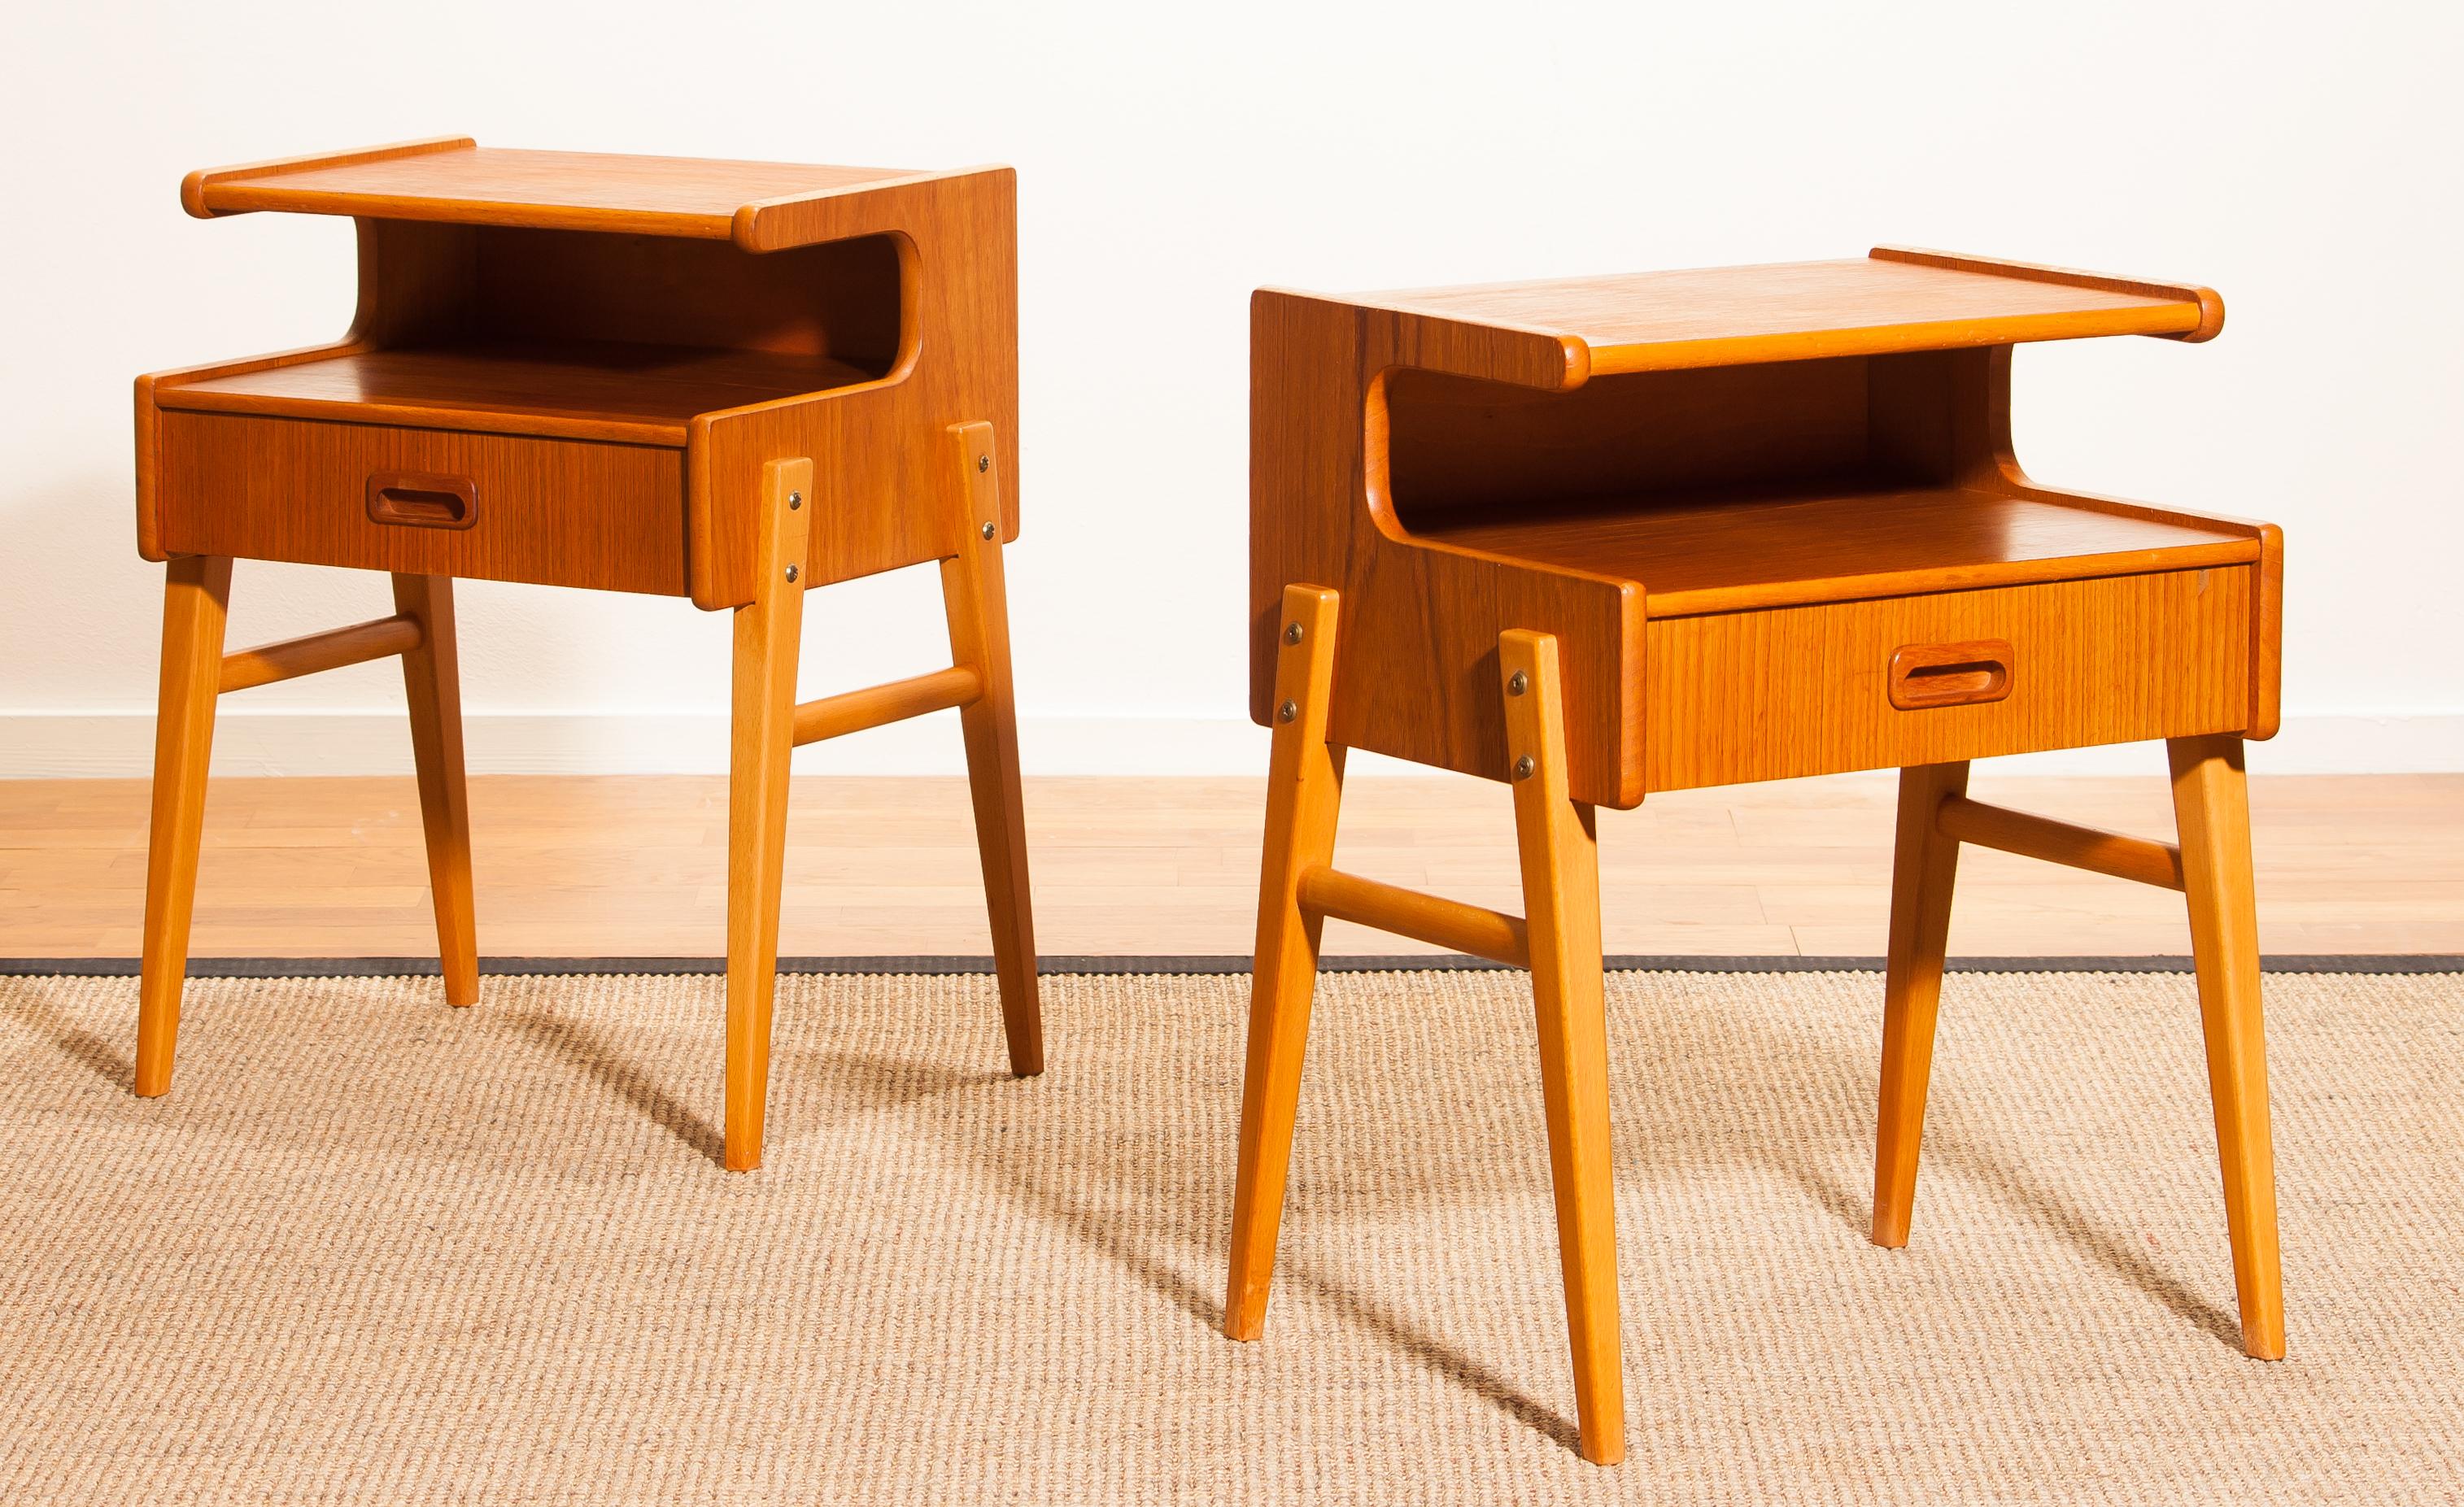 A pair of two lovely bedside tables in beautiful ‘C’ shape.
These tables are made of teak.
Each table has a drawer.
They are in very nice condition.
Period, 1960s.
Dimensions: H 54 cm, W 40 cm, D 33 cm.